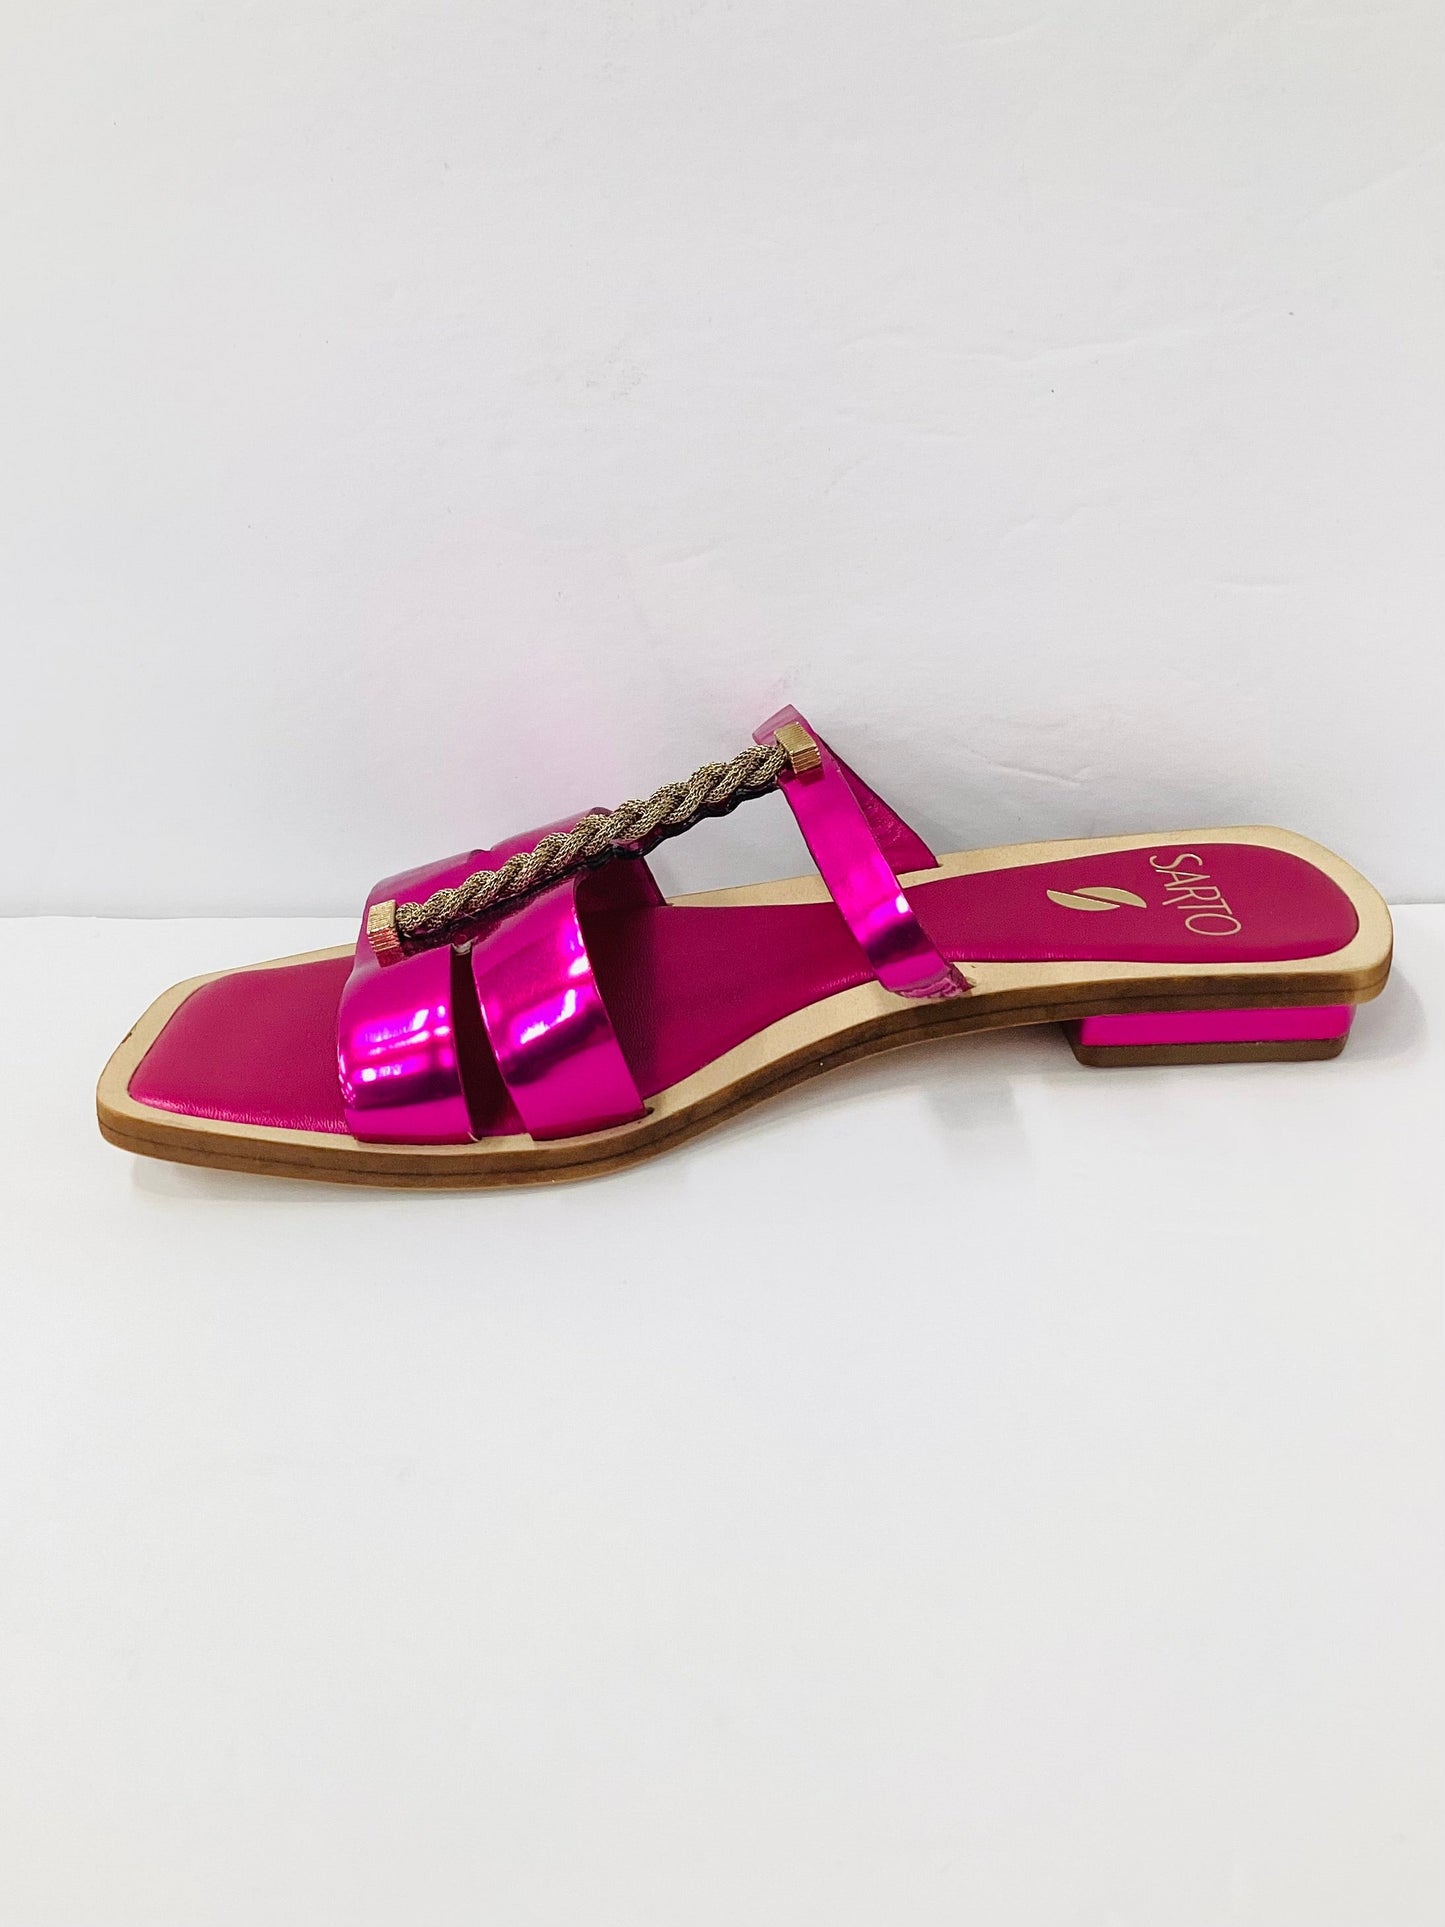 Sandals Flats By Franco Sarto  Size: 6.5